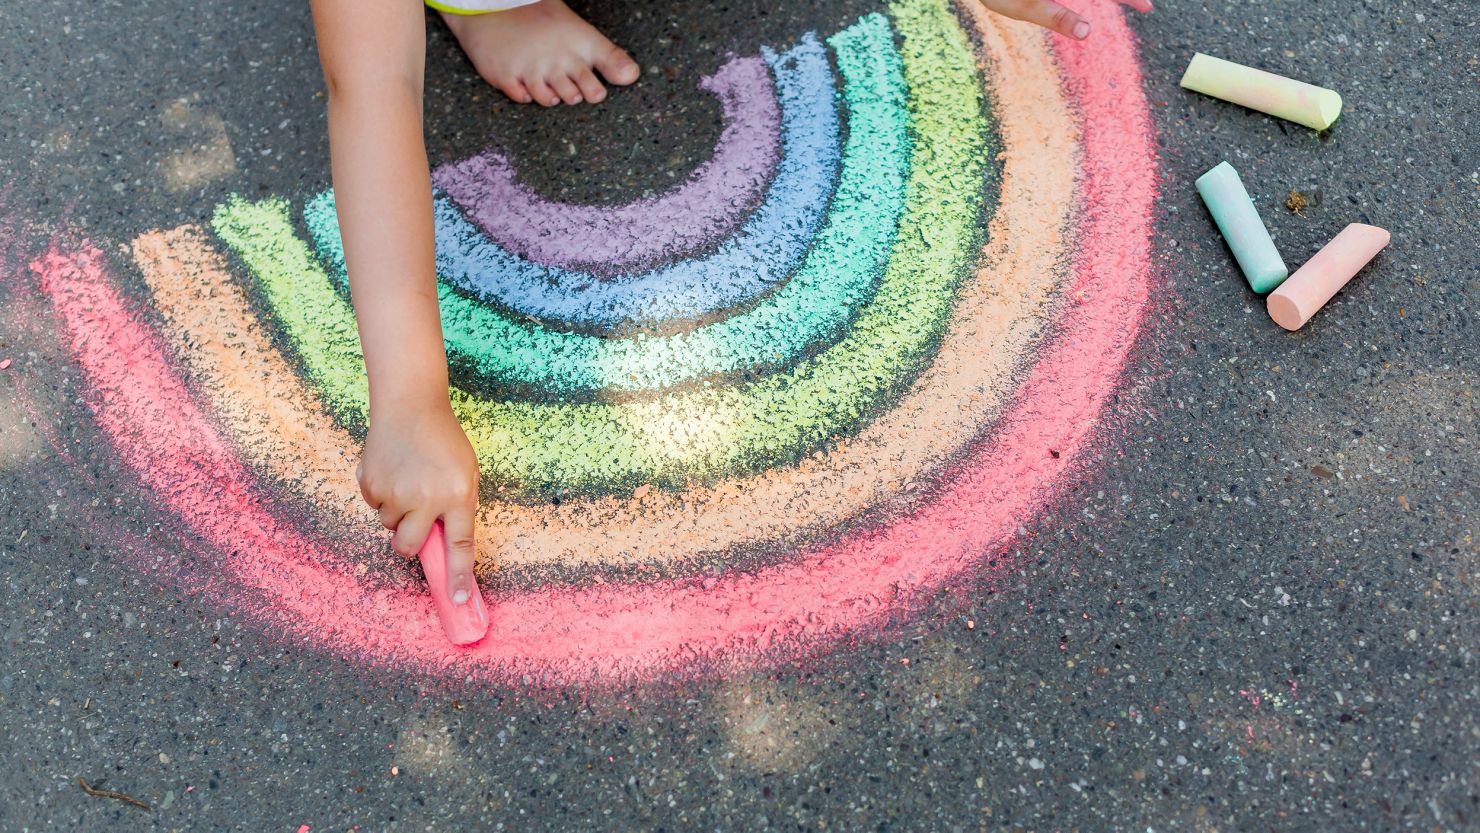 Art Project For Kids: How to Make Sidewalk Chalk